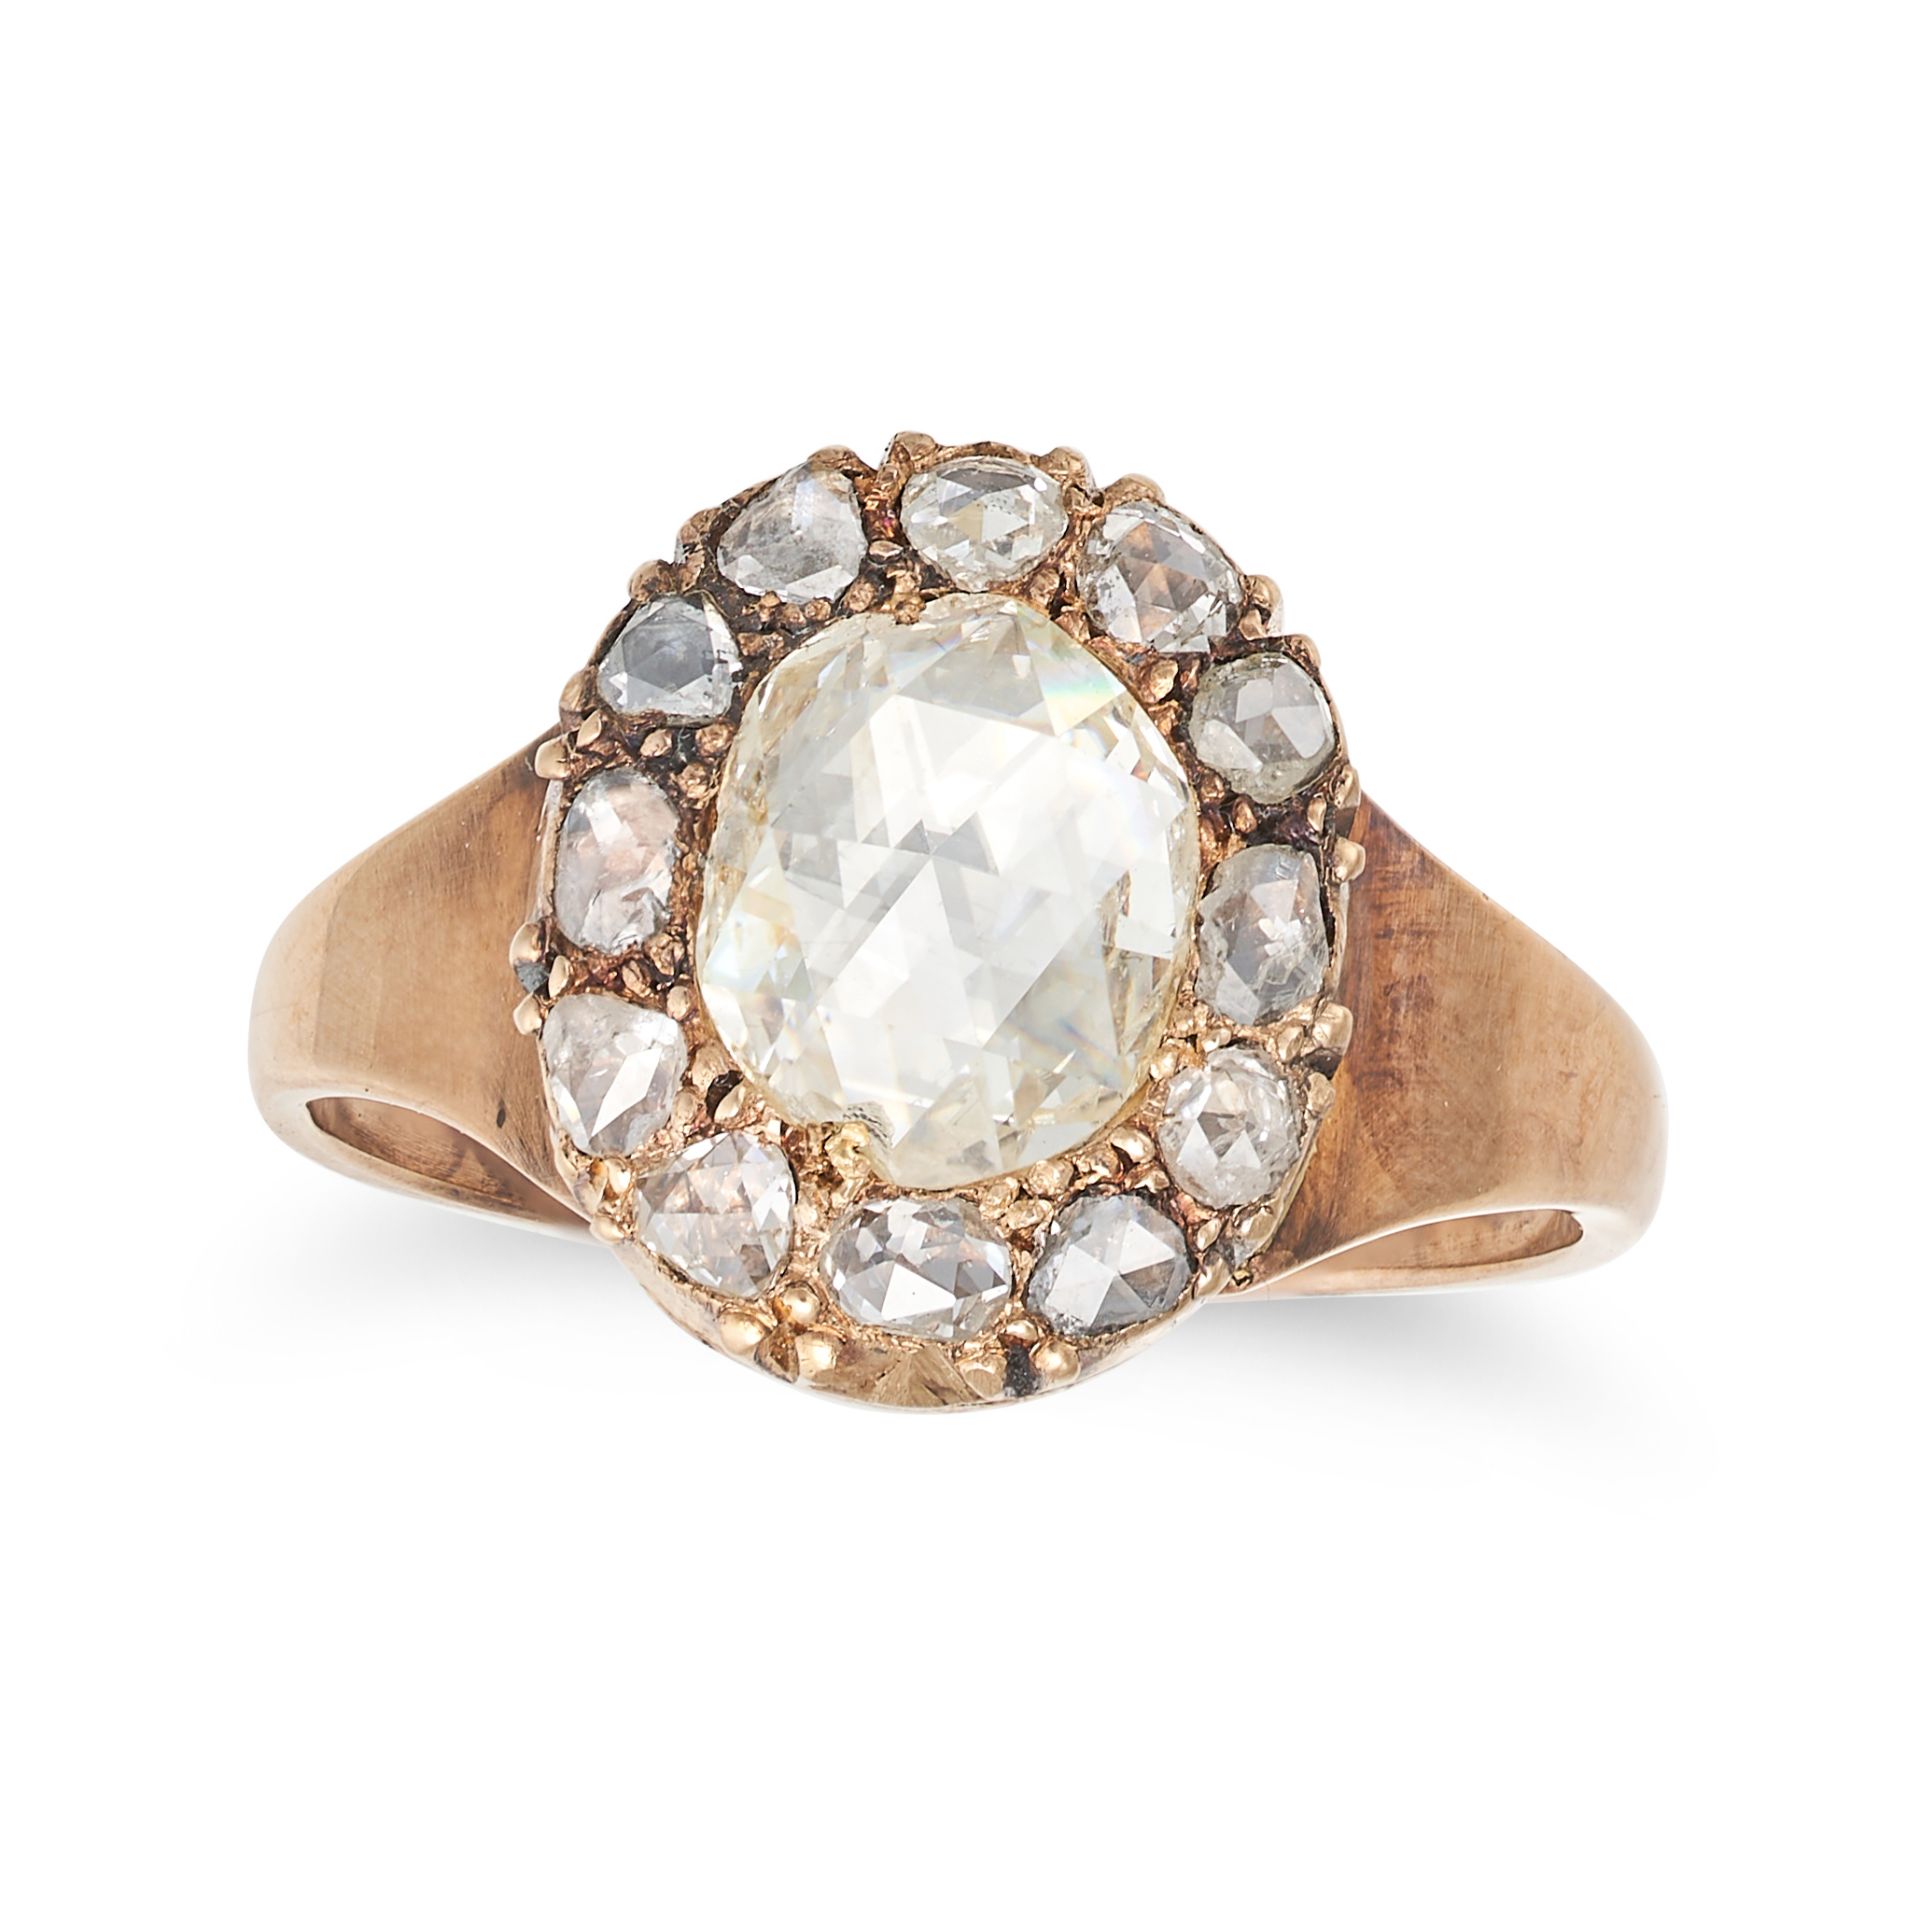 AN ANTIQUE DIAMOND CLUSTER RING in yellow gold, set with a rose cut diamond of 7.9mm in a cluster...